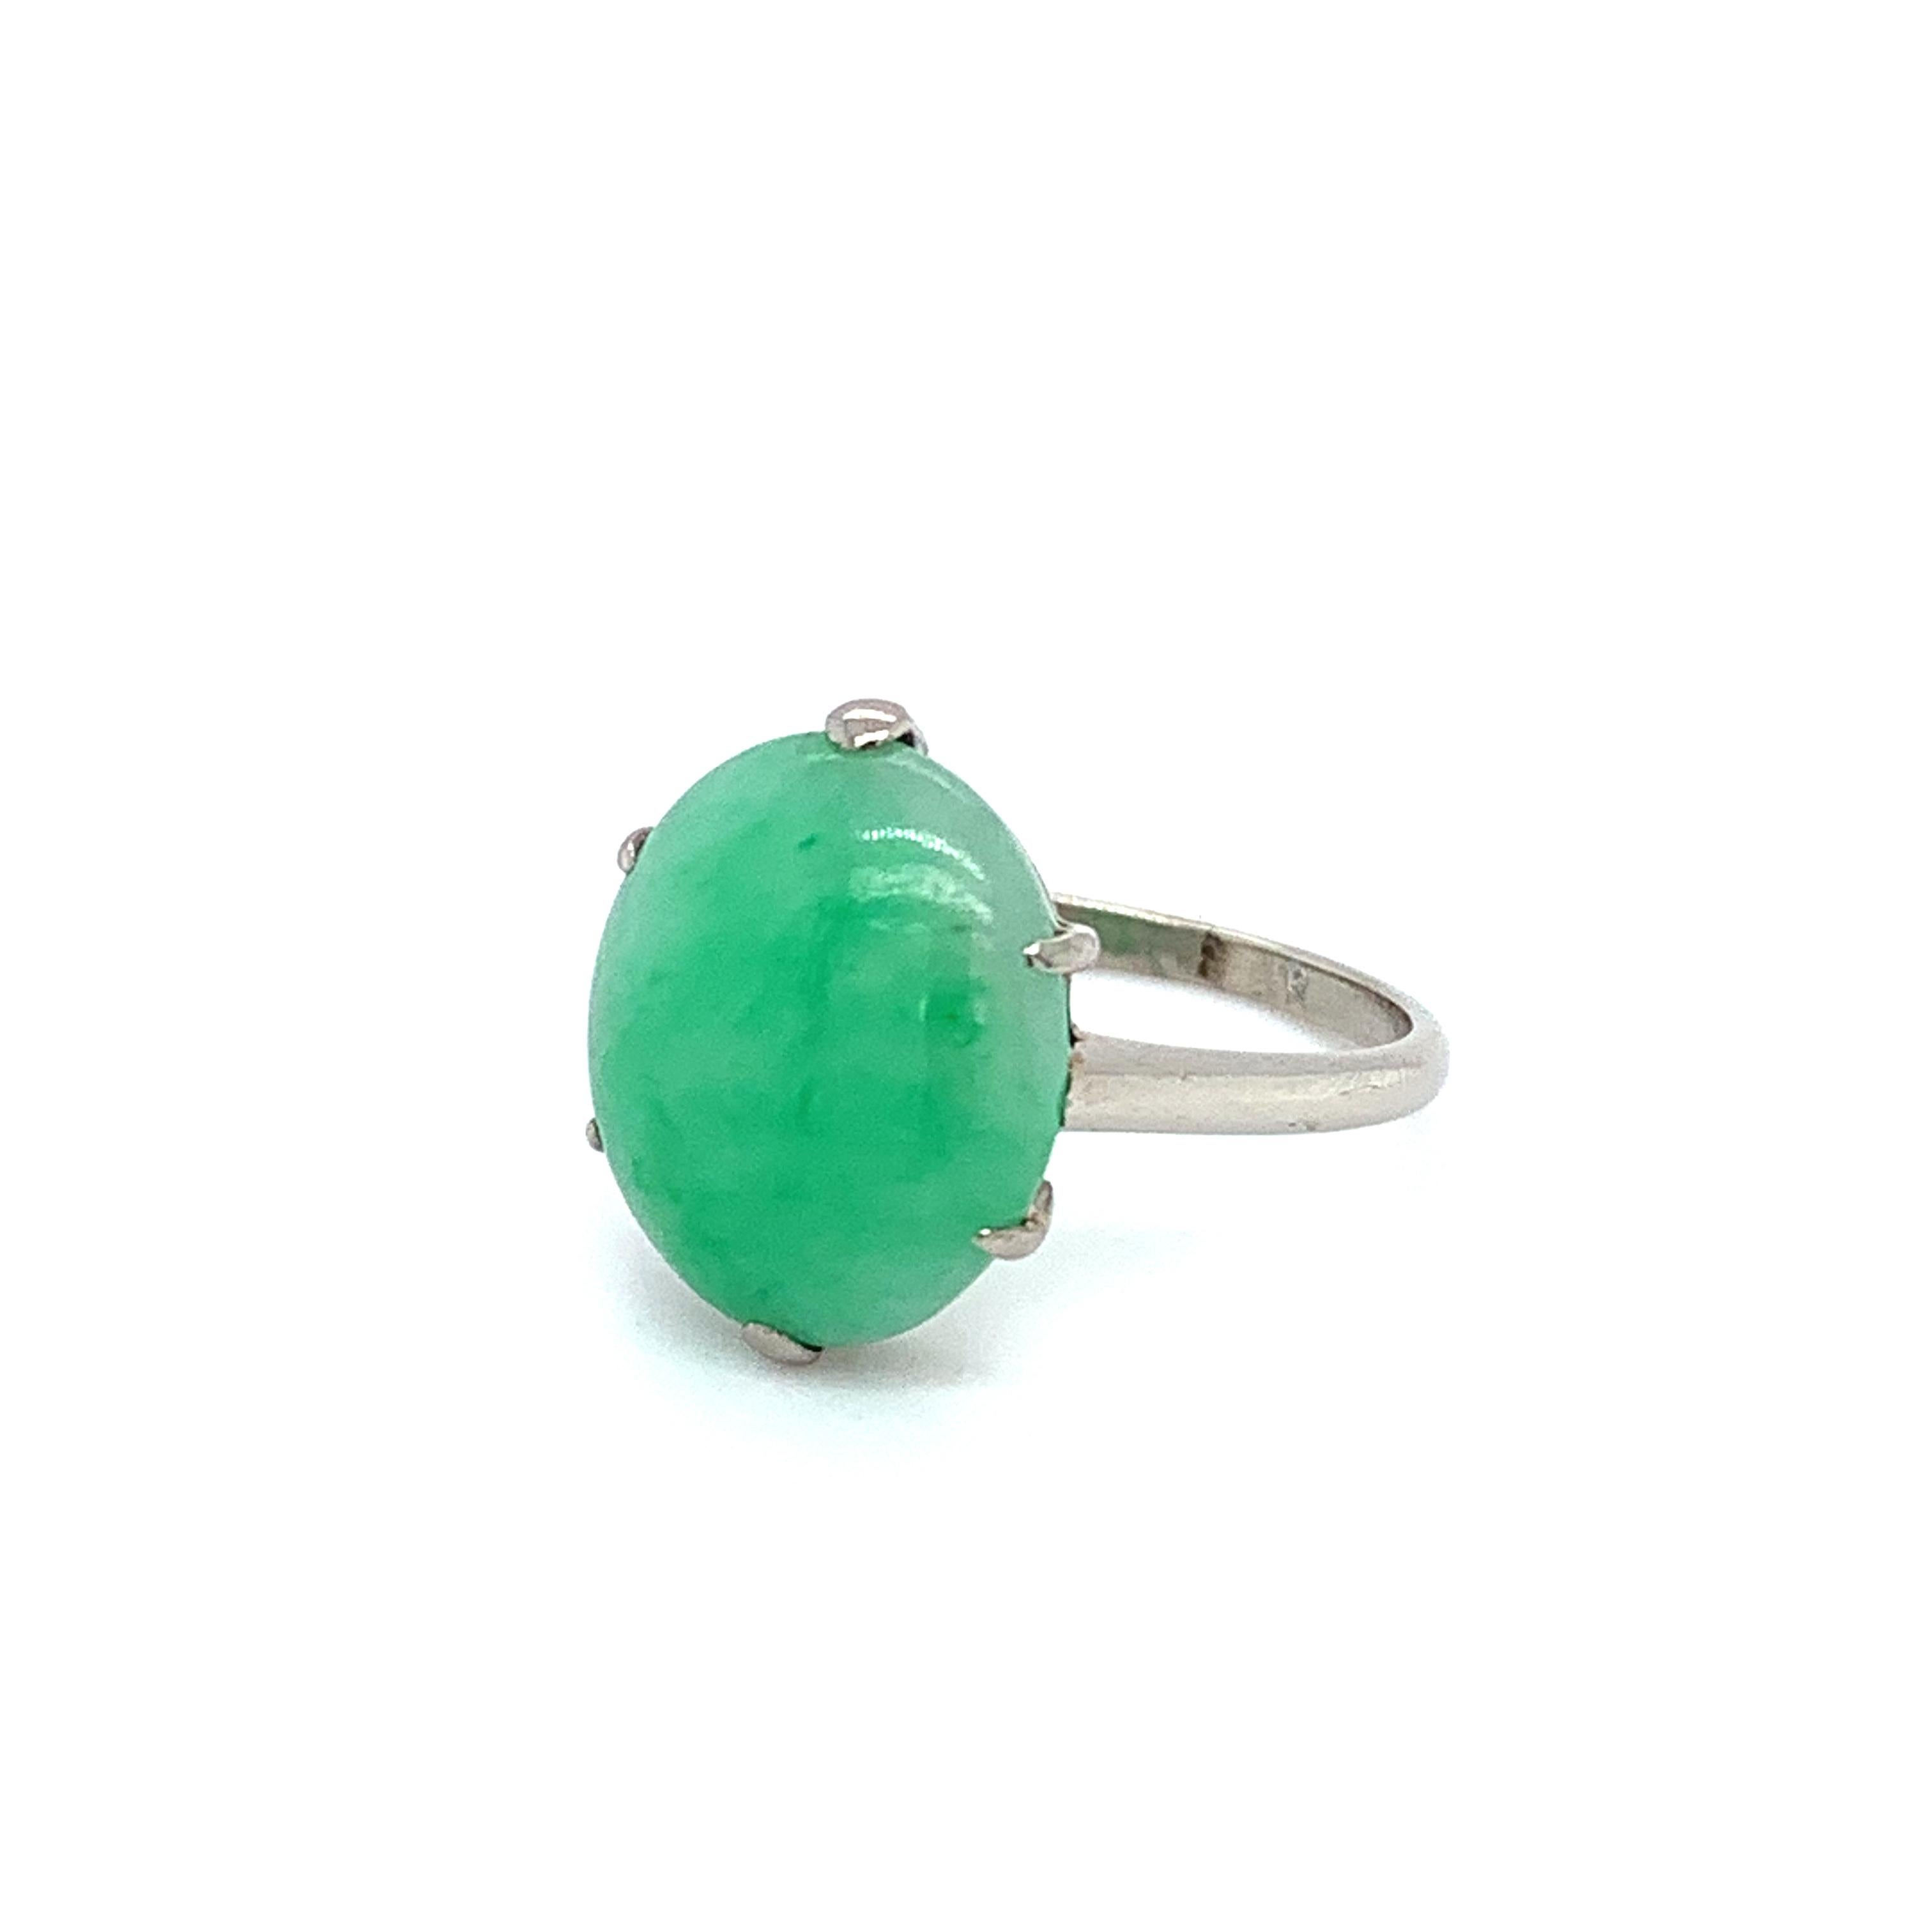 Jadeite green jade art deco cocktail ring 18k white gold
Oval shaped jadeite gemstone natural untreated total weight 5.00ct 
Measuring approximately 16x12mm
The ring can be resized
Band width approximately 2mm
Hallmark 
The ring can be resized
Size